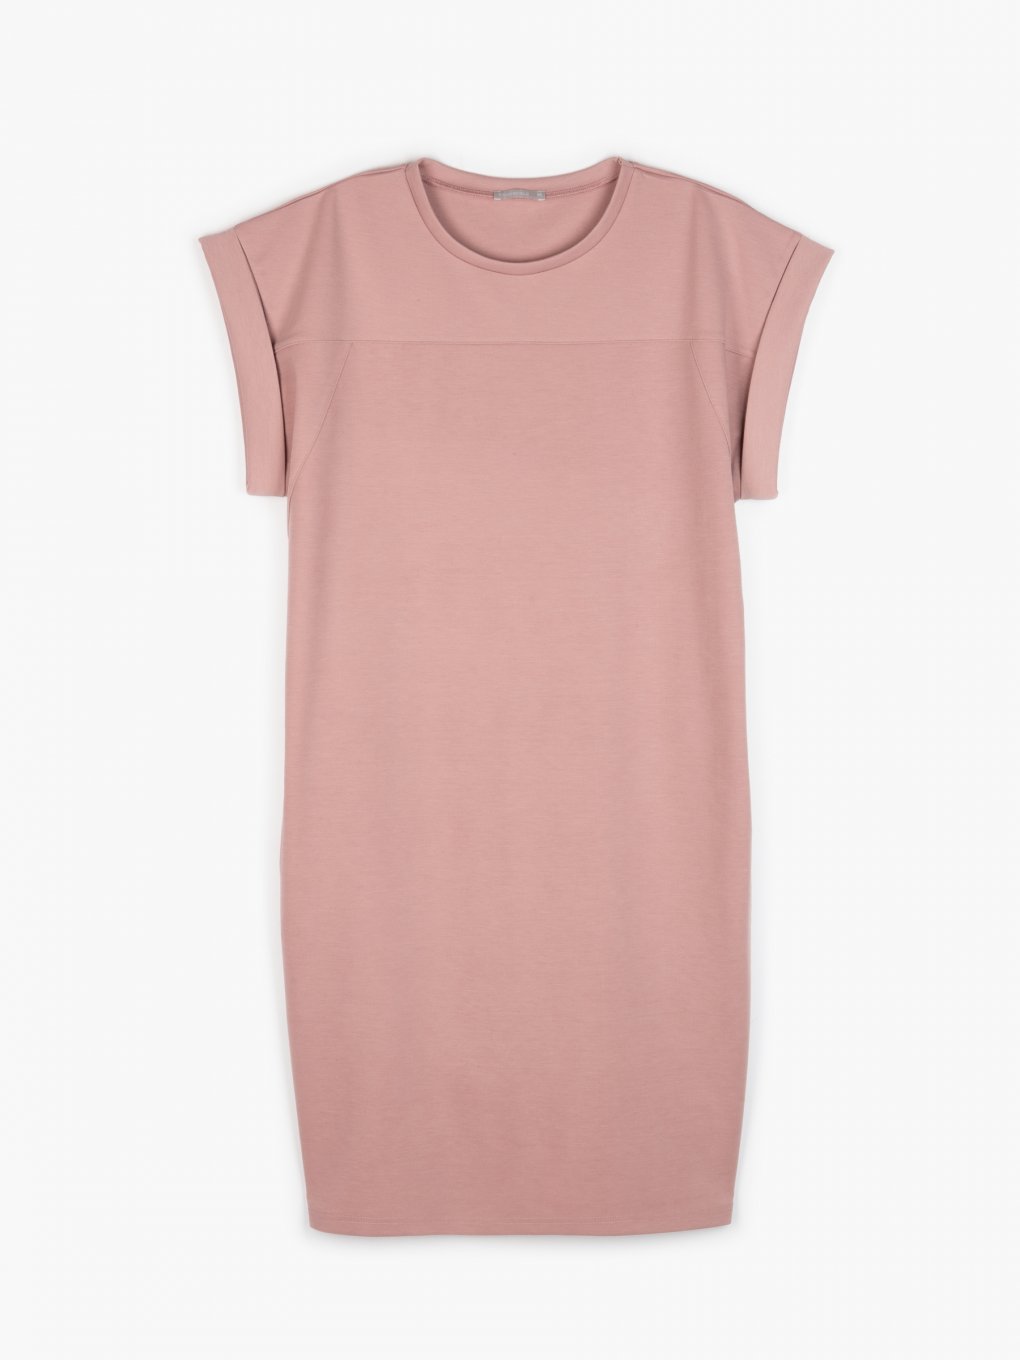 T-shirt dress with side pokets